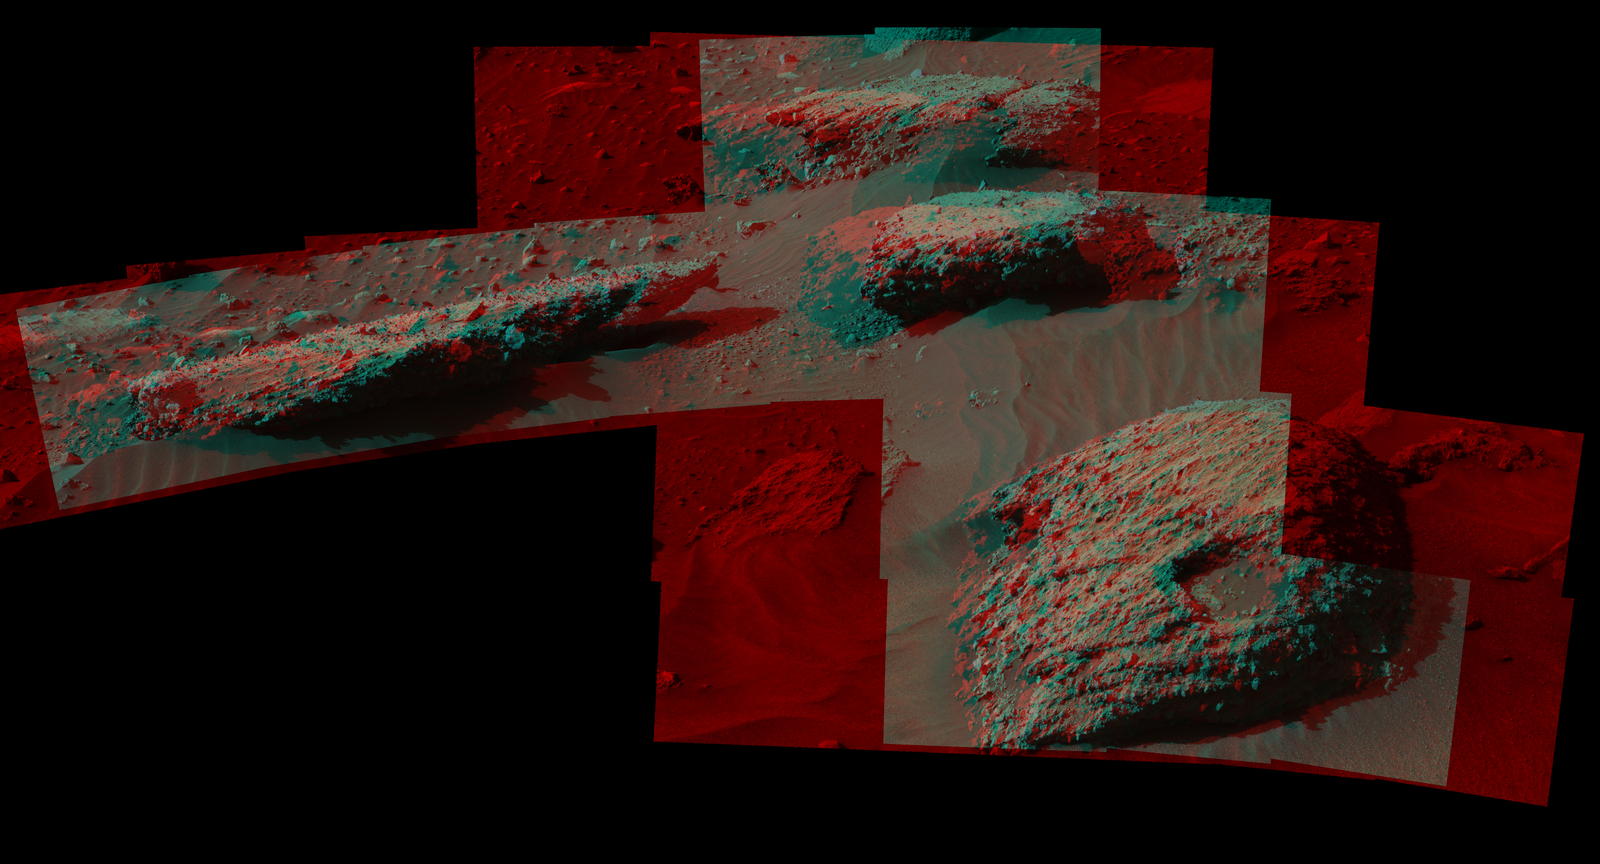 Breccia-Conglomerate Rocks on Lower Mount Sharp, Mars (Stereo)